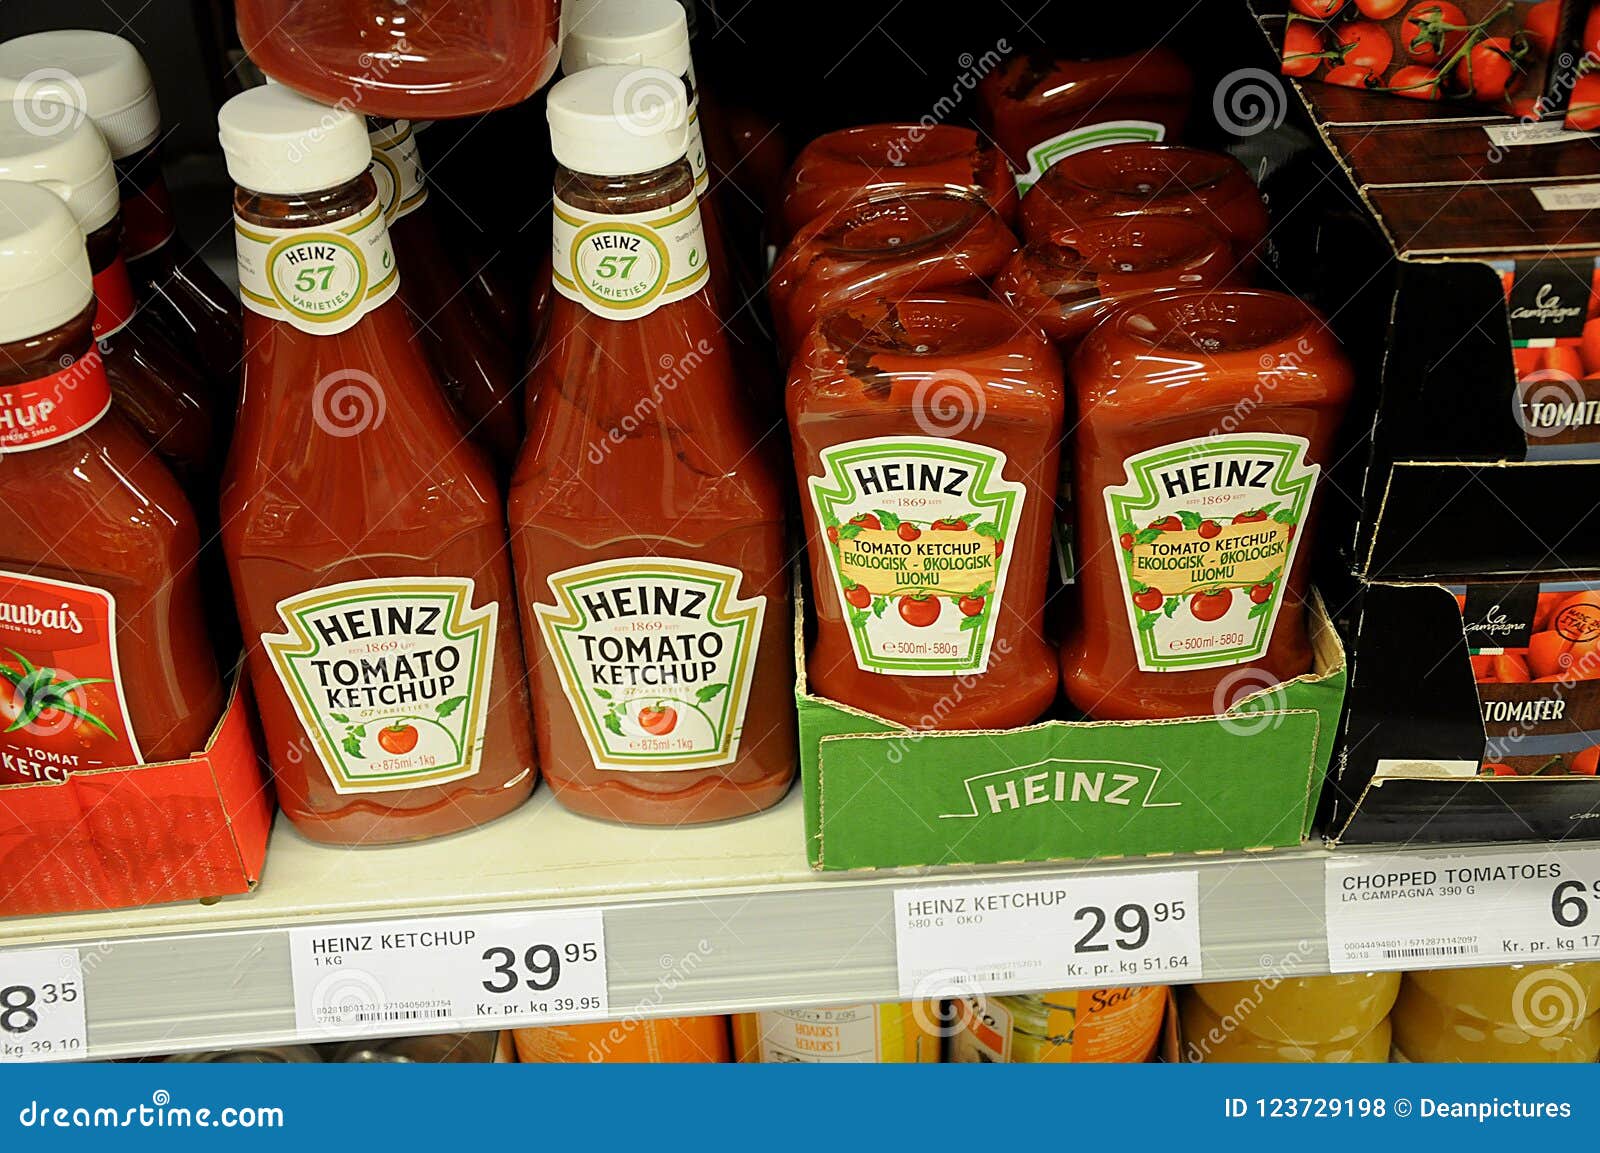 KRAFT HEINZ TOMTO KETCHUP TOMATO CH. Editorial Stock - Image of united, editorial: 123729198